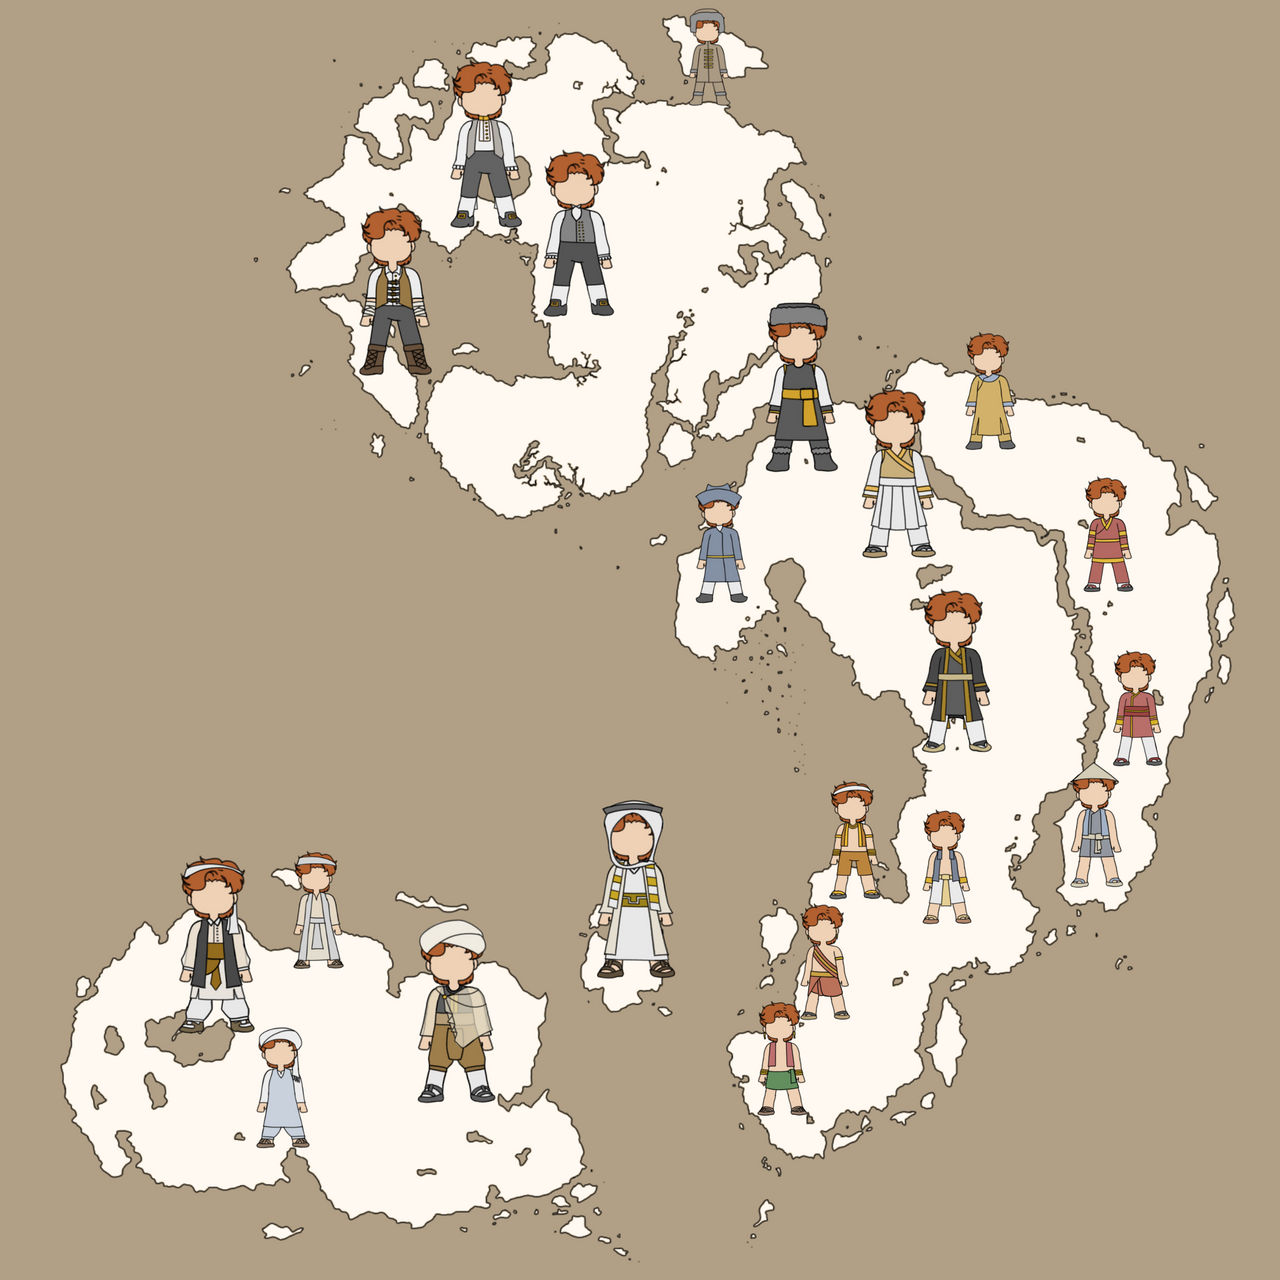 Traditional Clothing Around The World Fantasy Map by DanielDabble